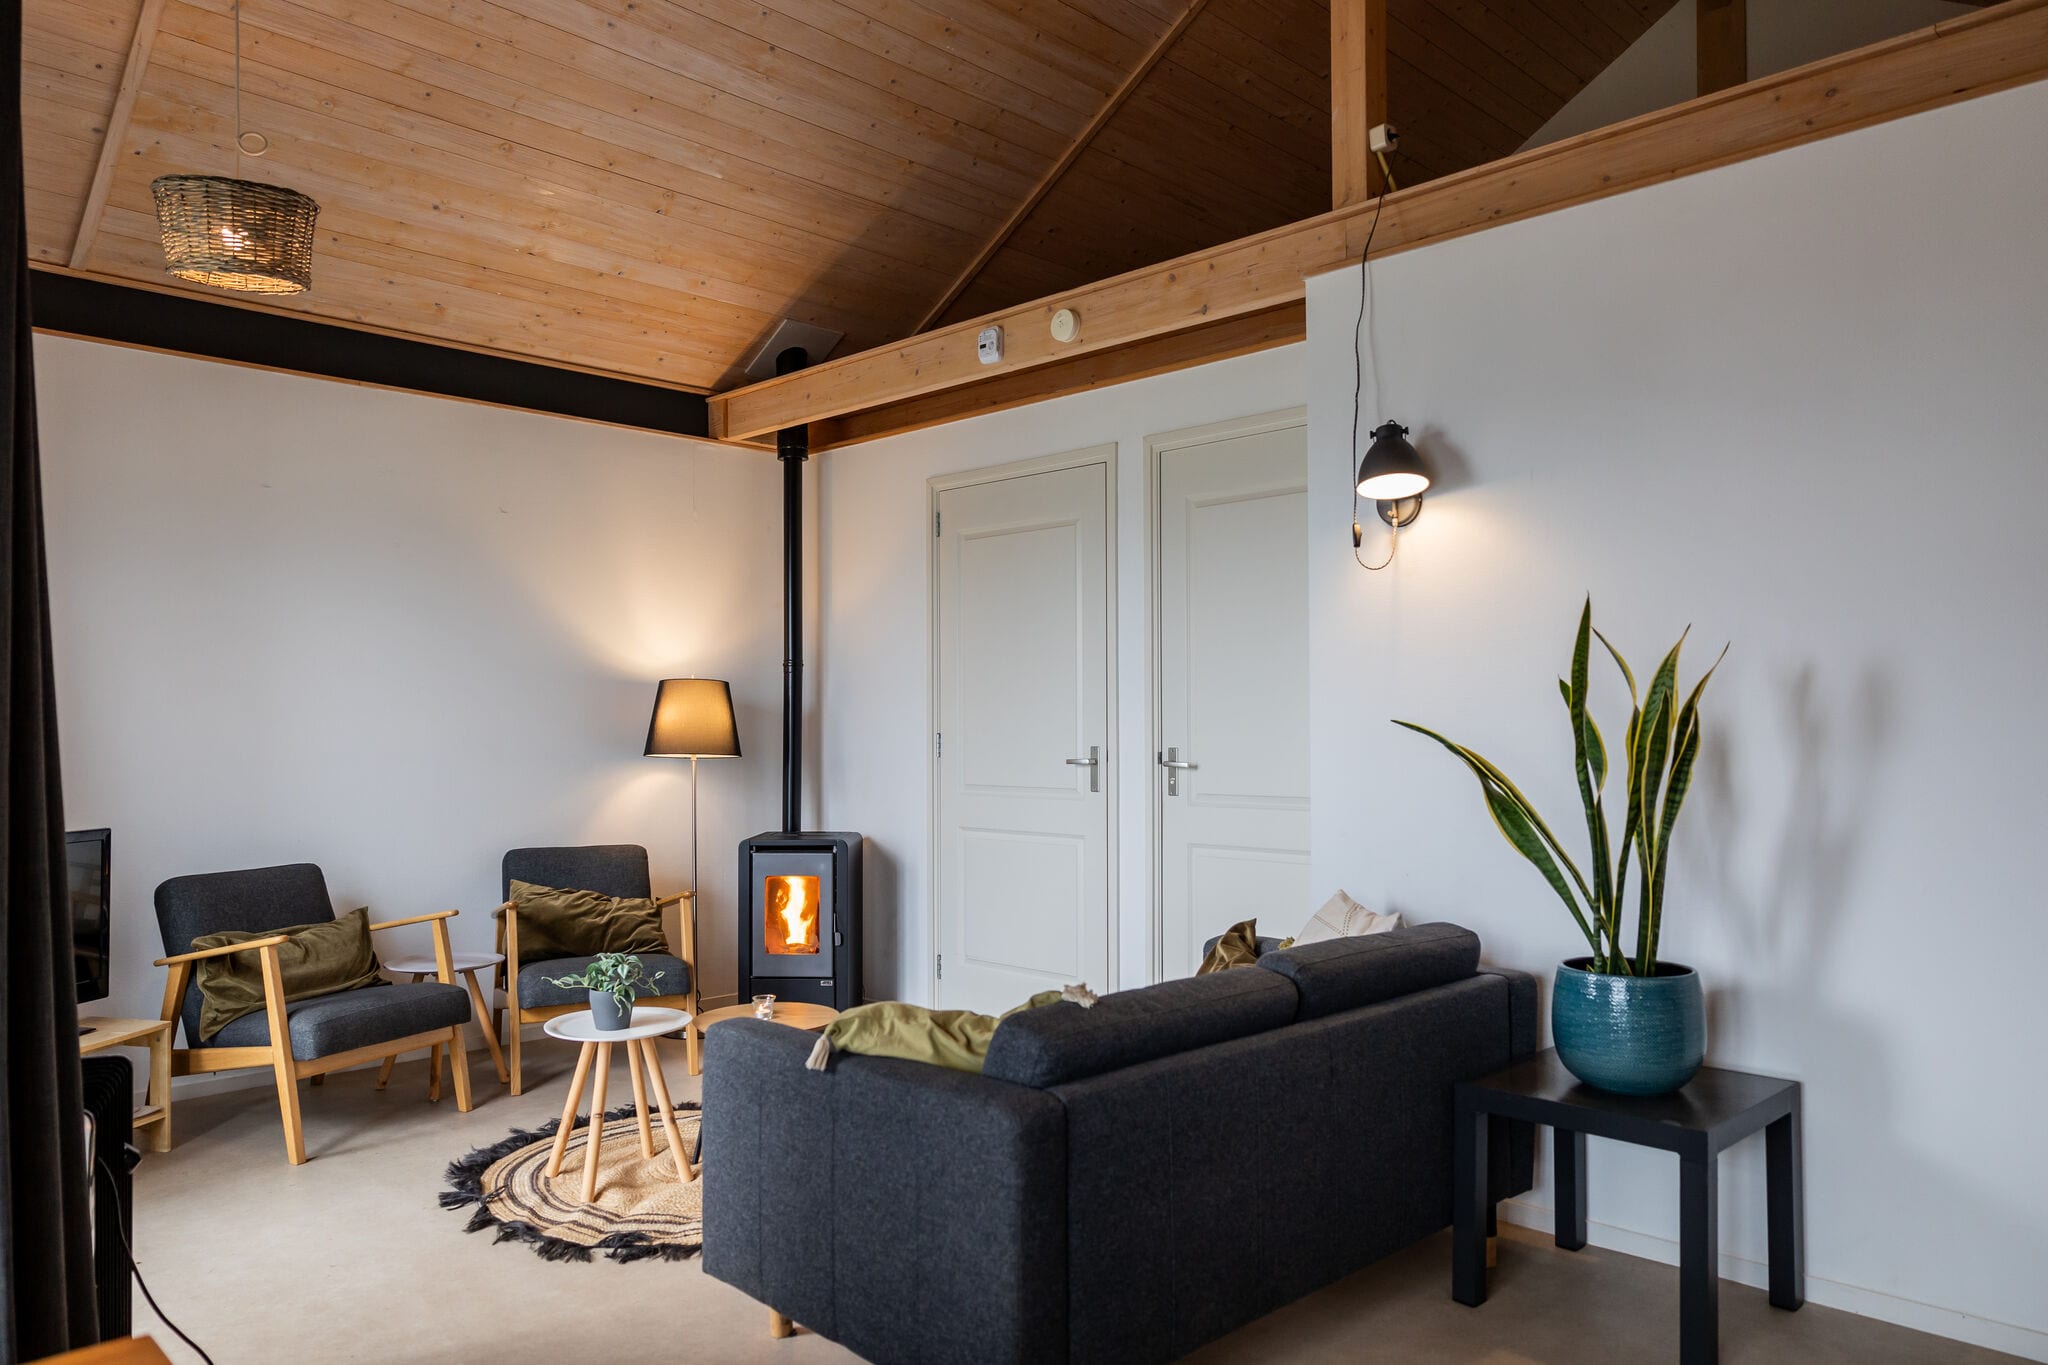 Cozy chalet with palet stove